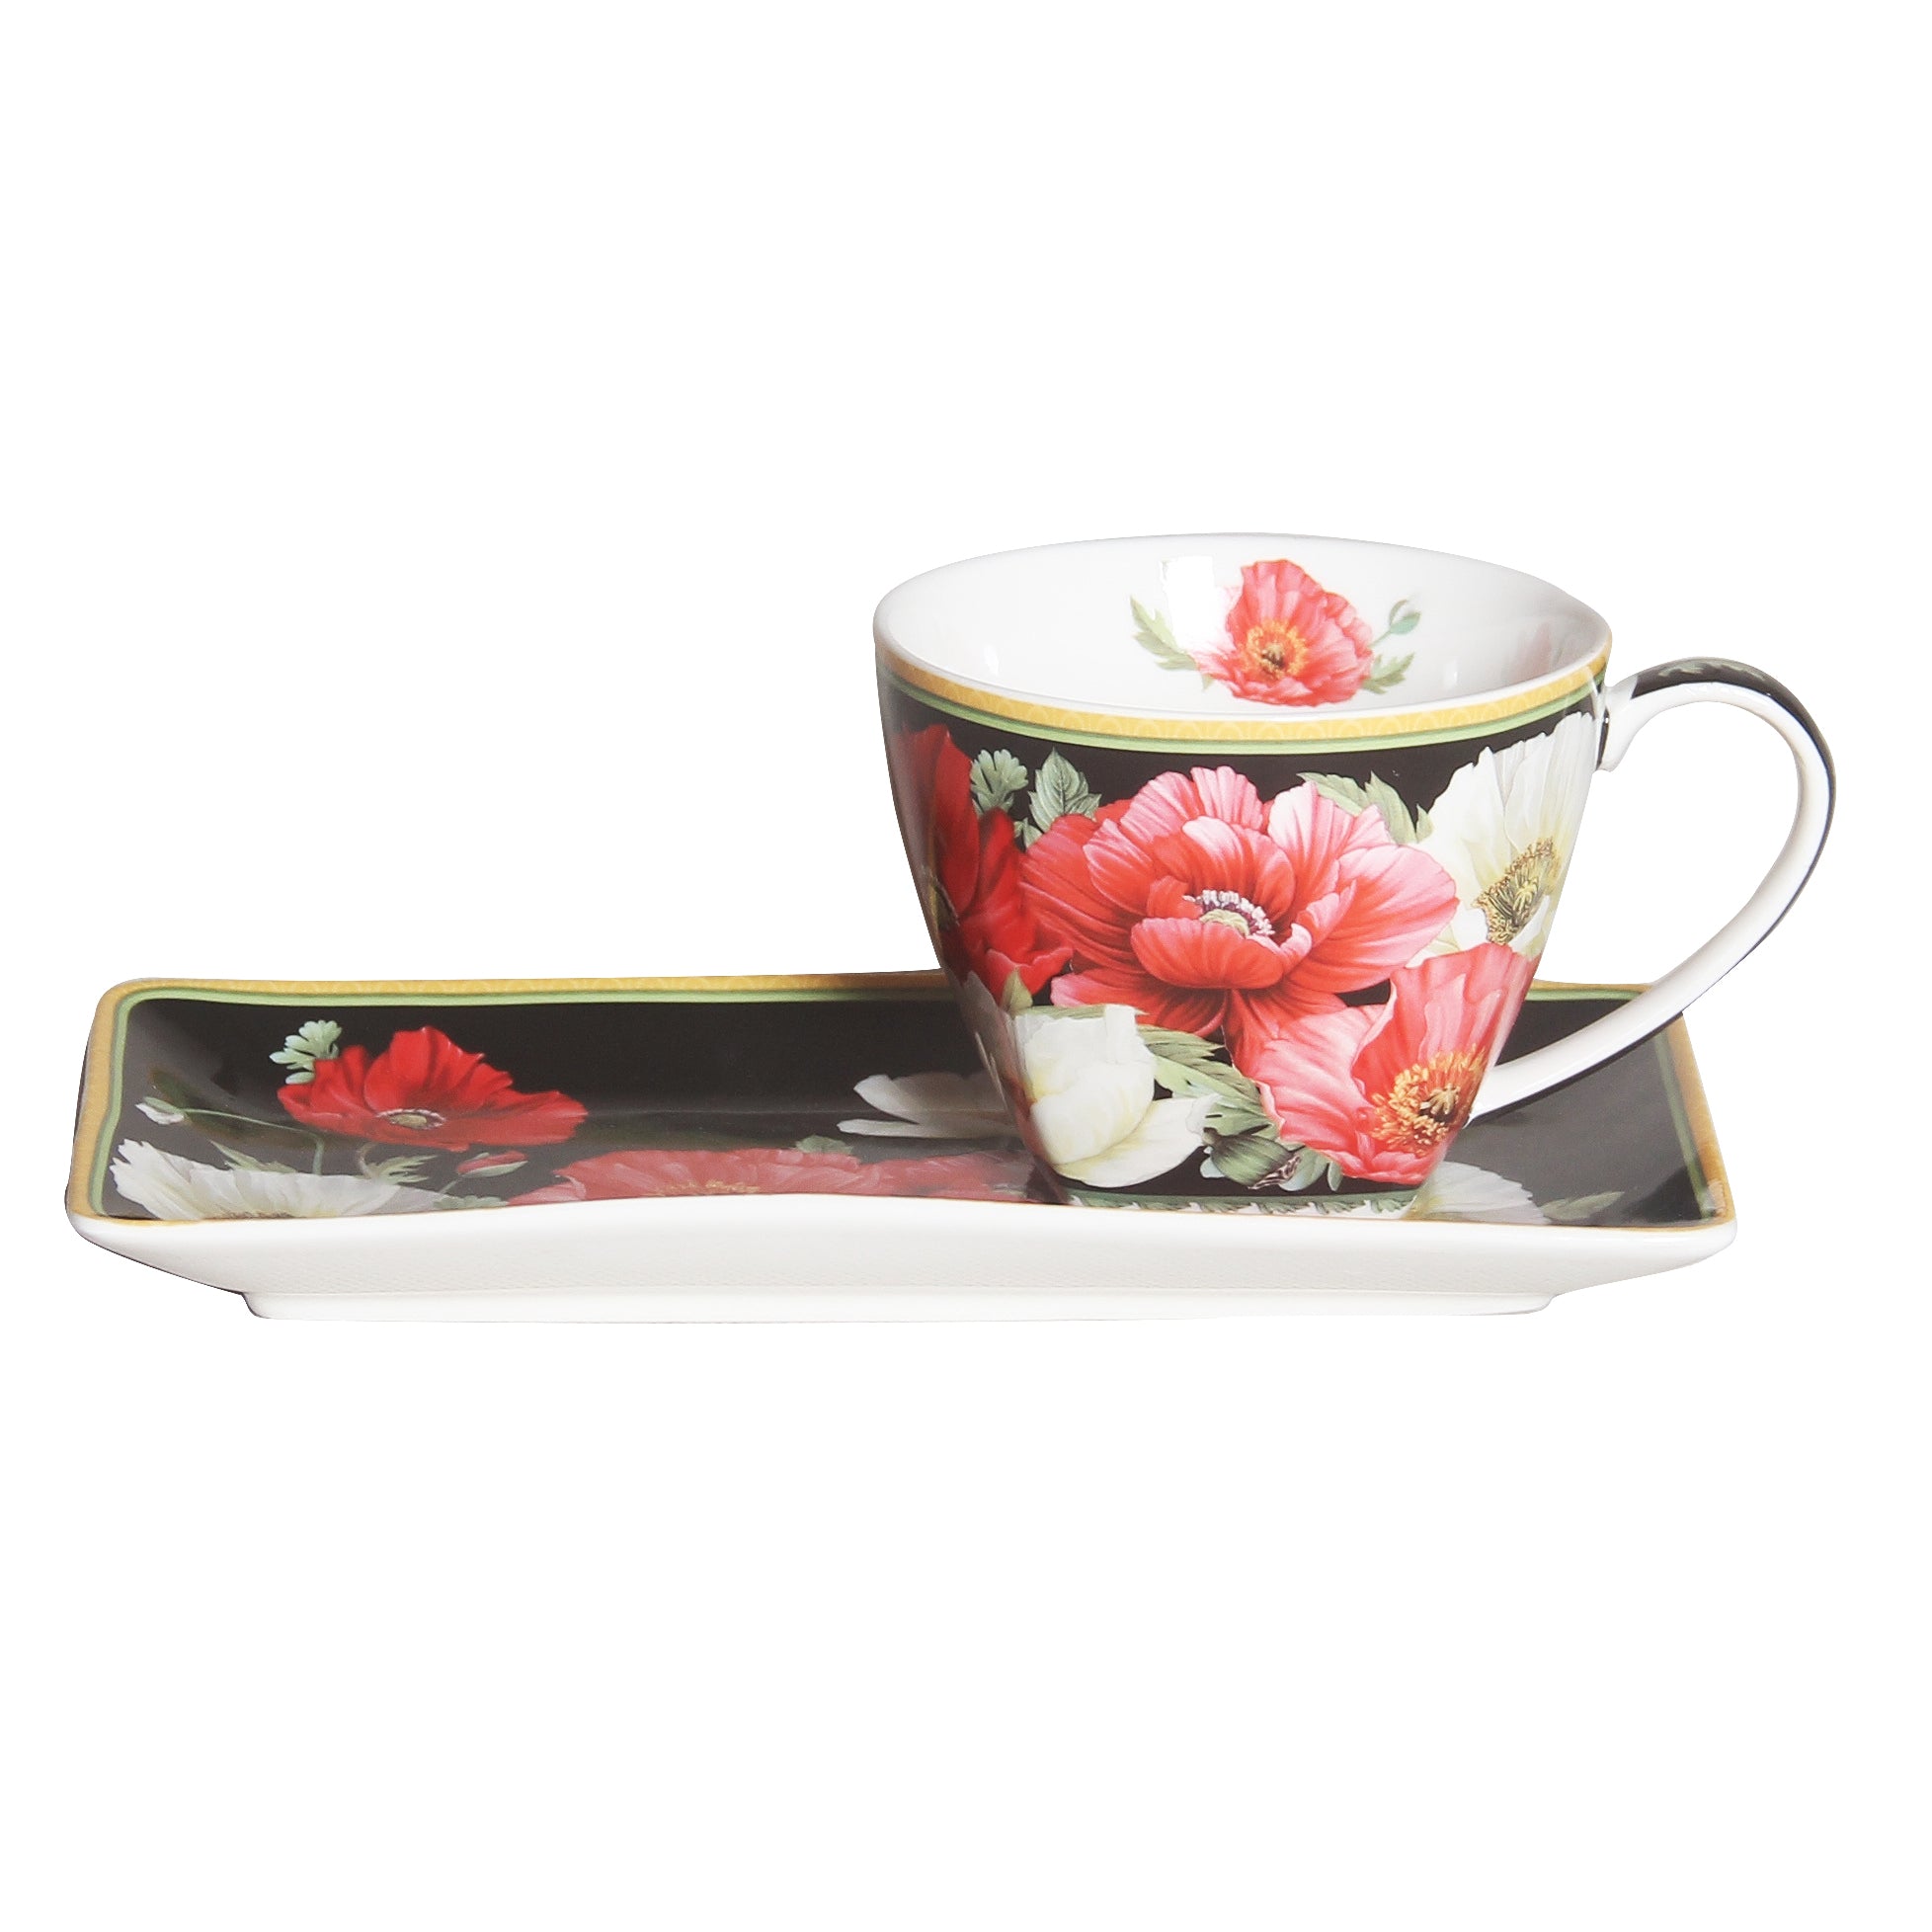 Cup and Saucer Breakfast Set - Poppies on Black Fine Bone China - 250ml Gift Box - Dollars and Sense